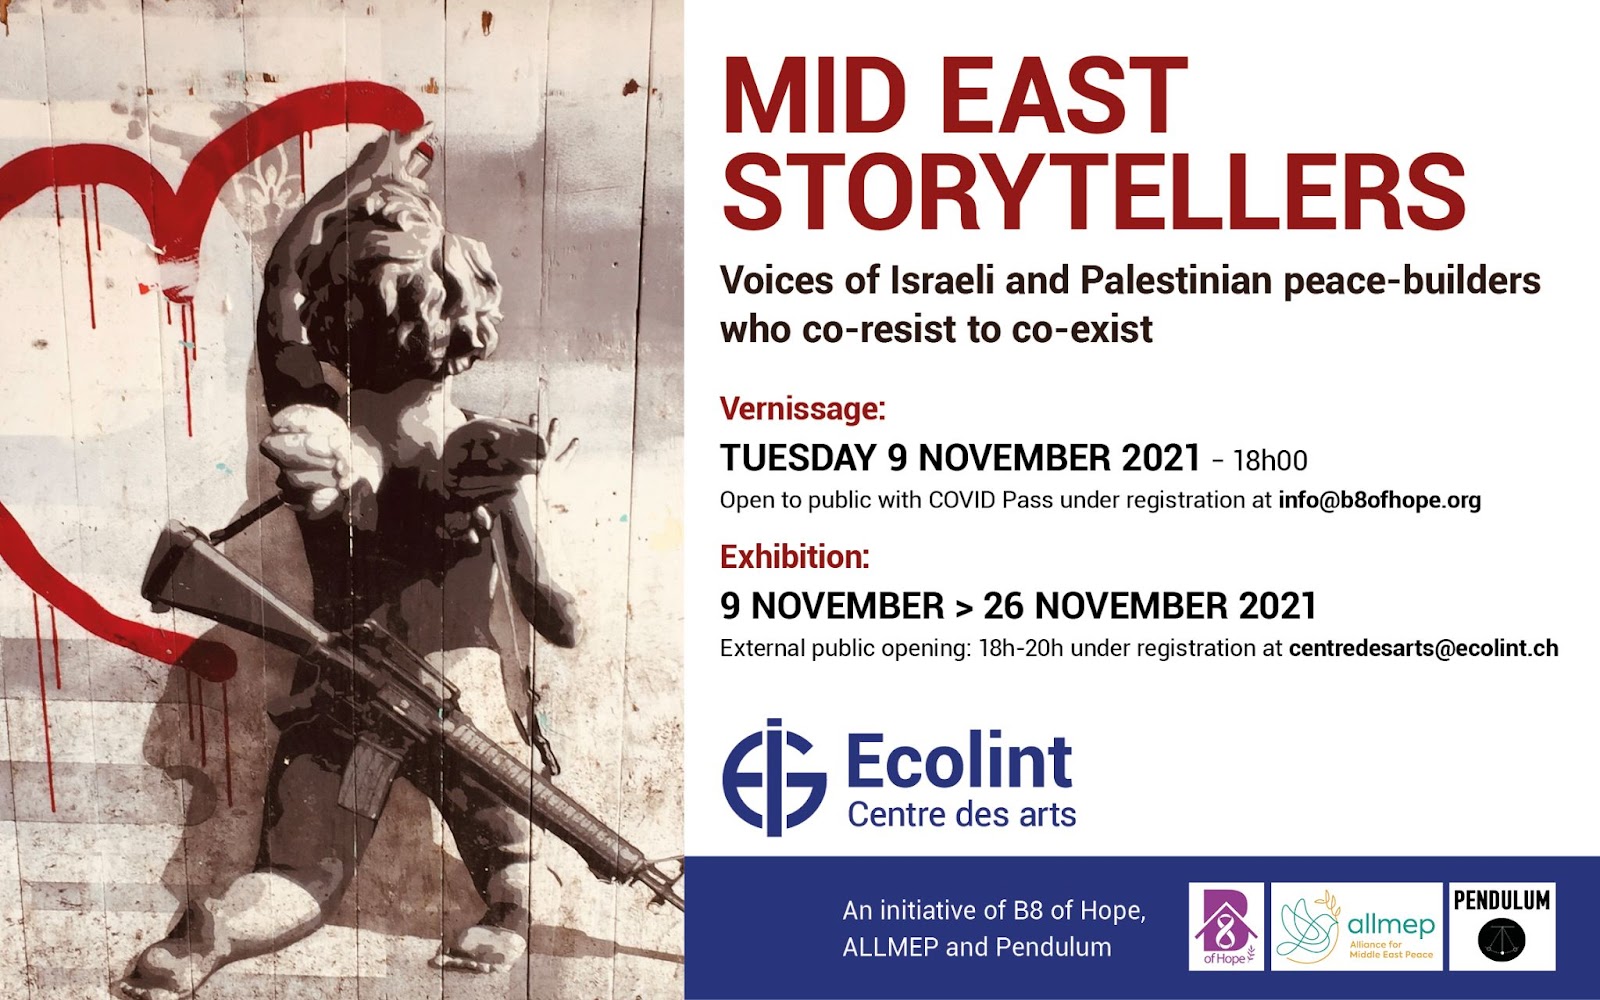 Mid East Storytellers Exhibition: Interview with Mme. Muller